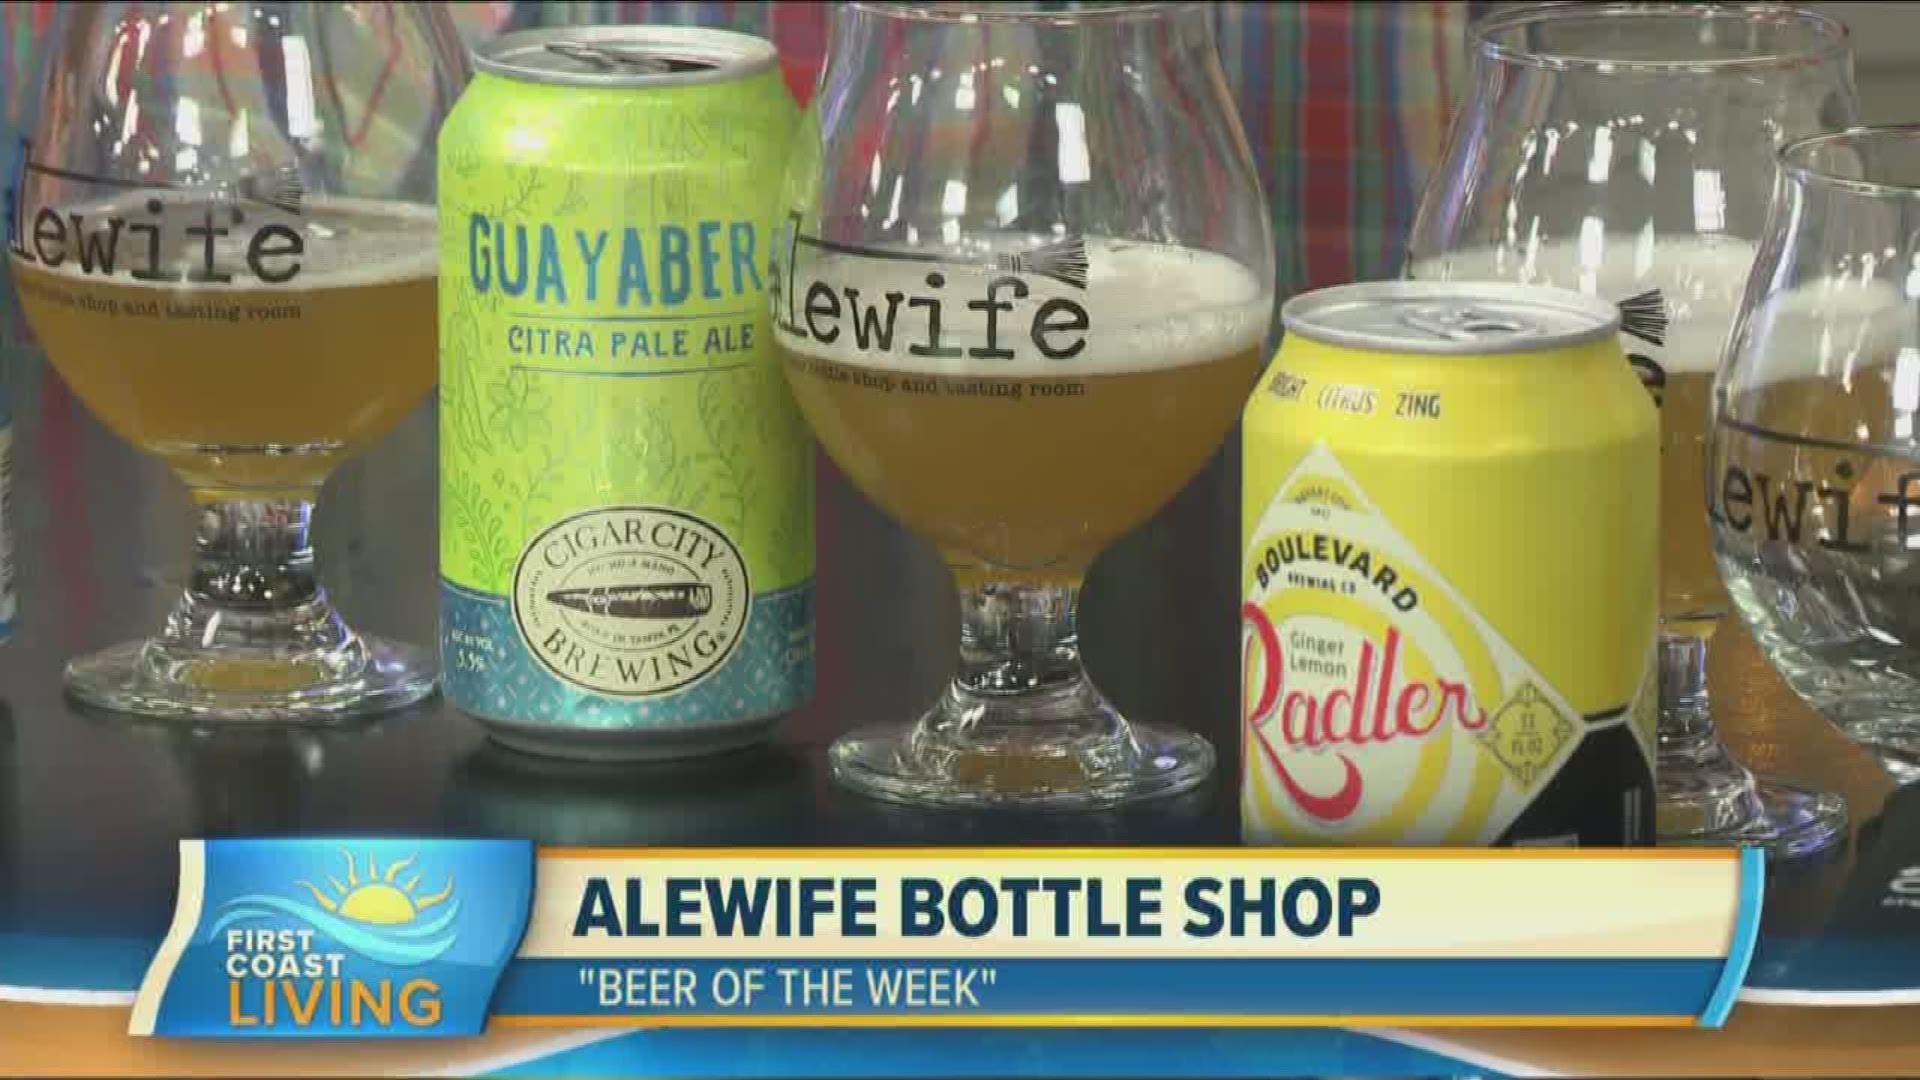 See what's brewing at Alewife Bottle Shop for this  week's pick of Beer of the Week!